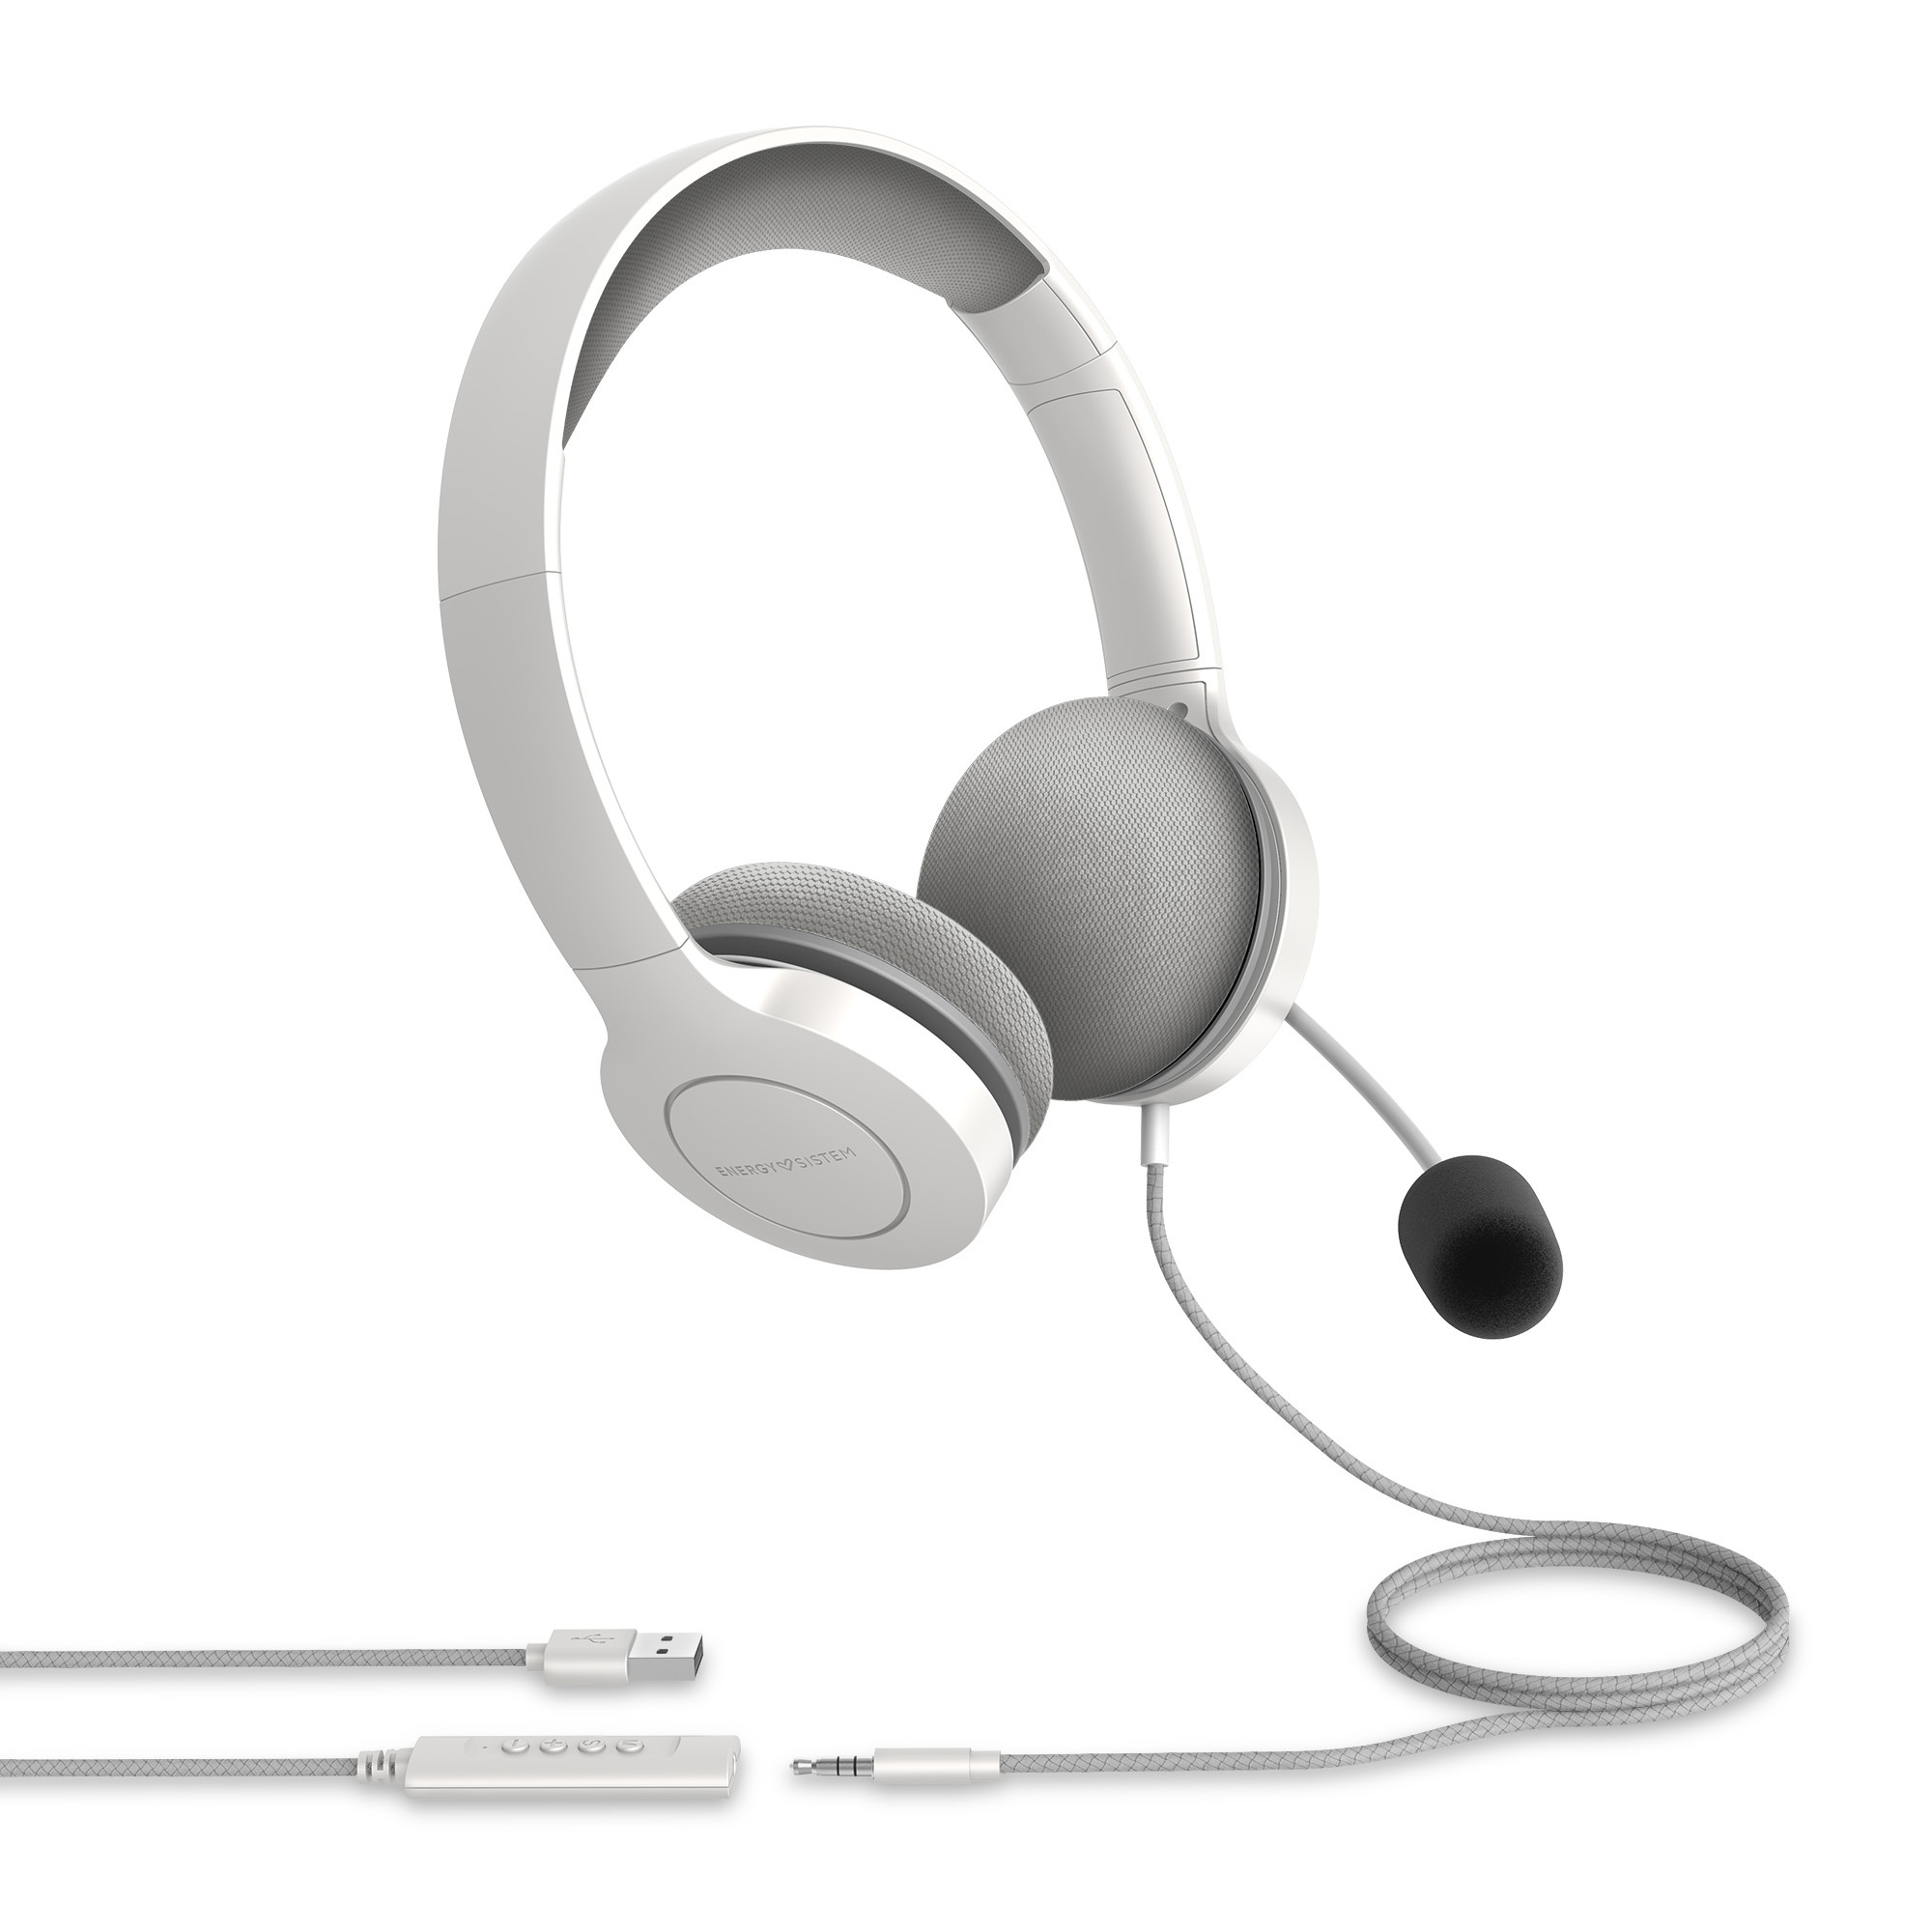 Headset for PC with audio controller to adjust the volume